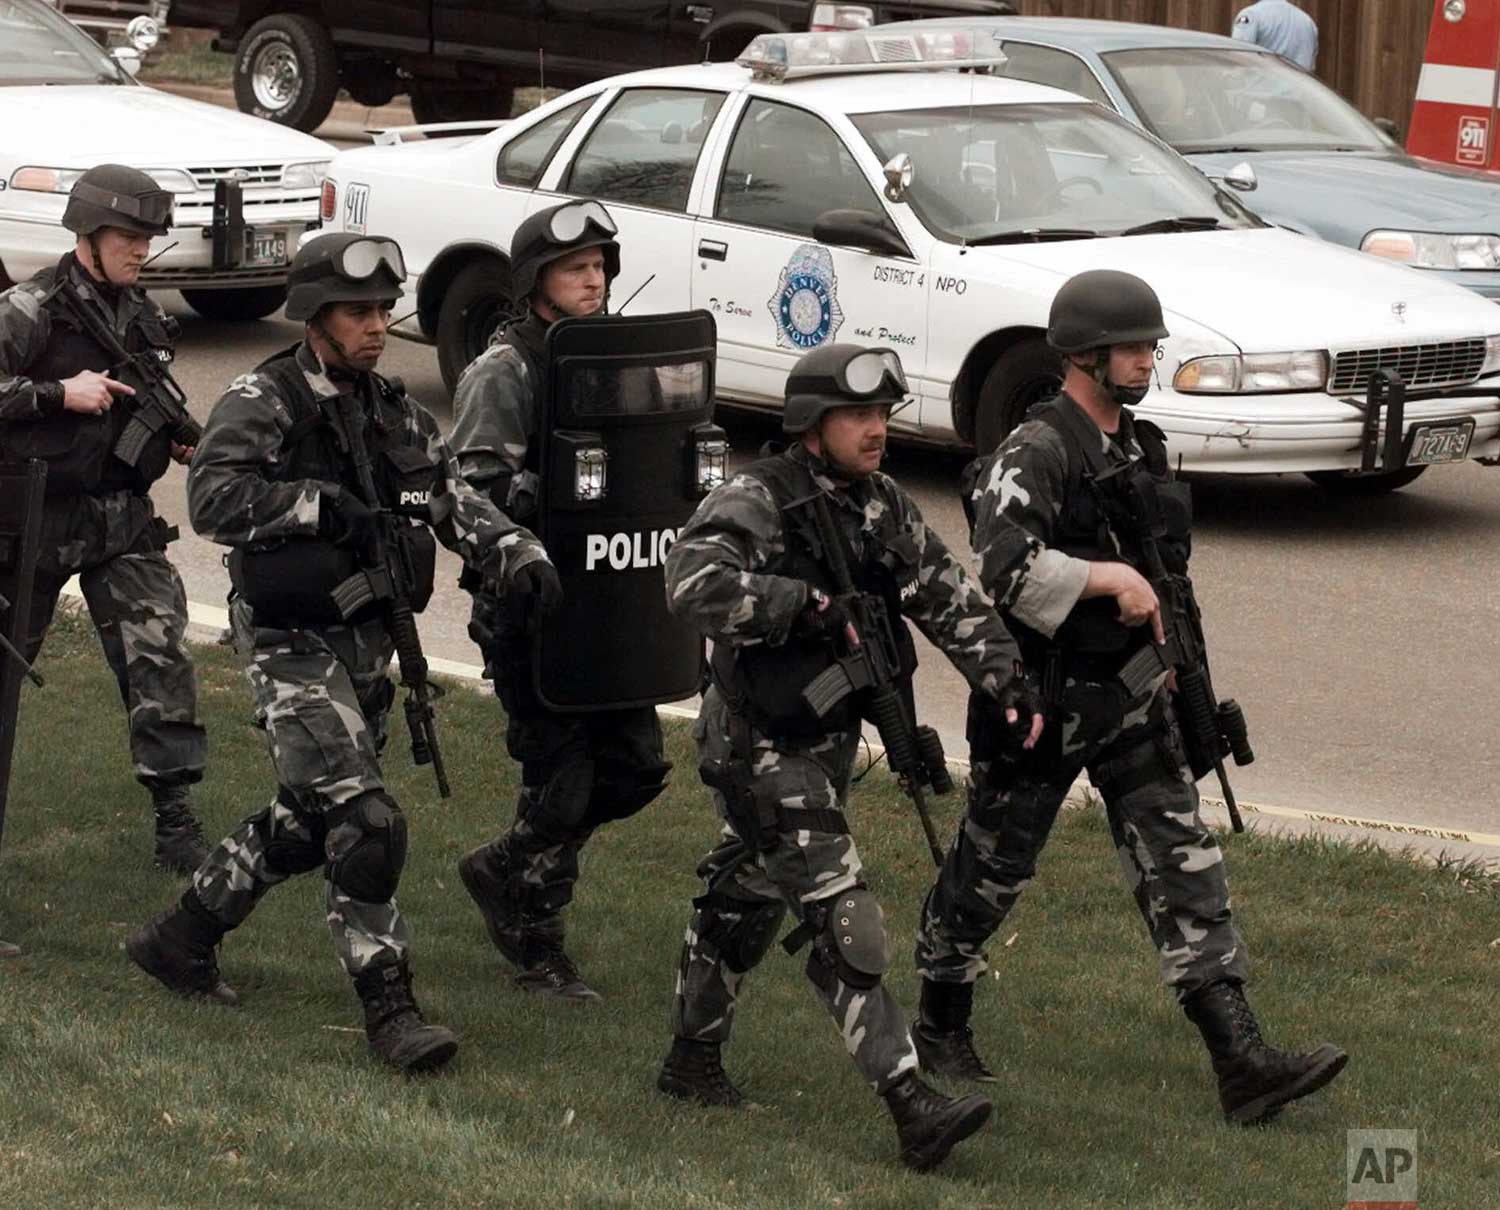  In this April 20, 1999 photo, members of a police SWAT march to Columbine High School in Littleton, Colo., as they prepare to do a final search of the school. Twelve students and a teacher died in the shootings before two teenage gunmen committed su